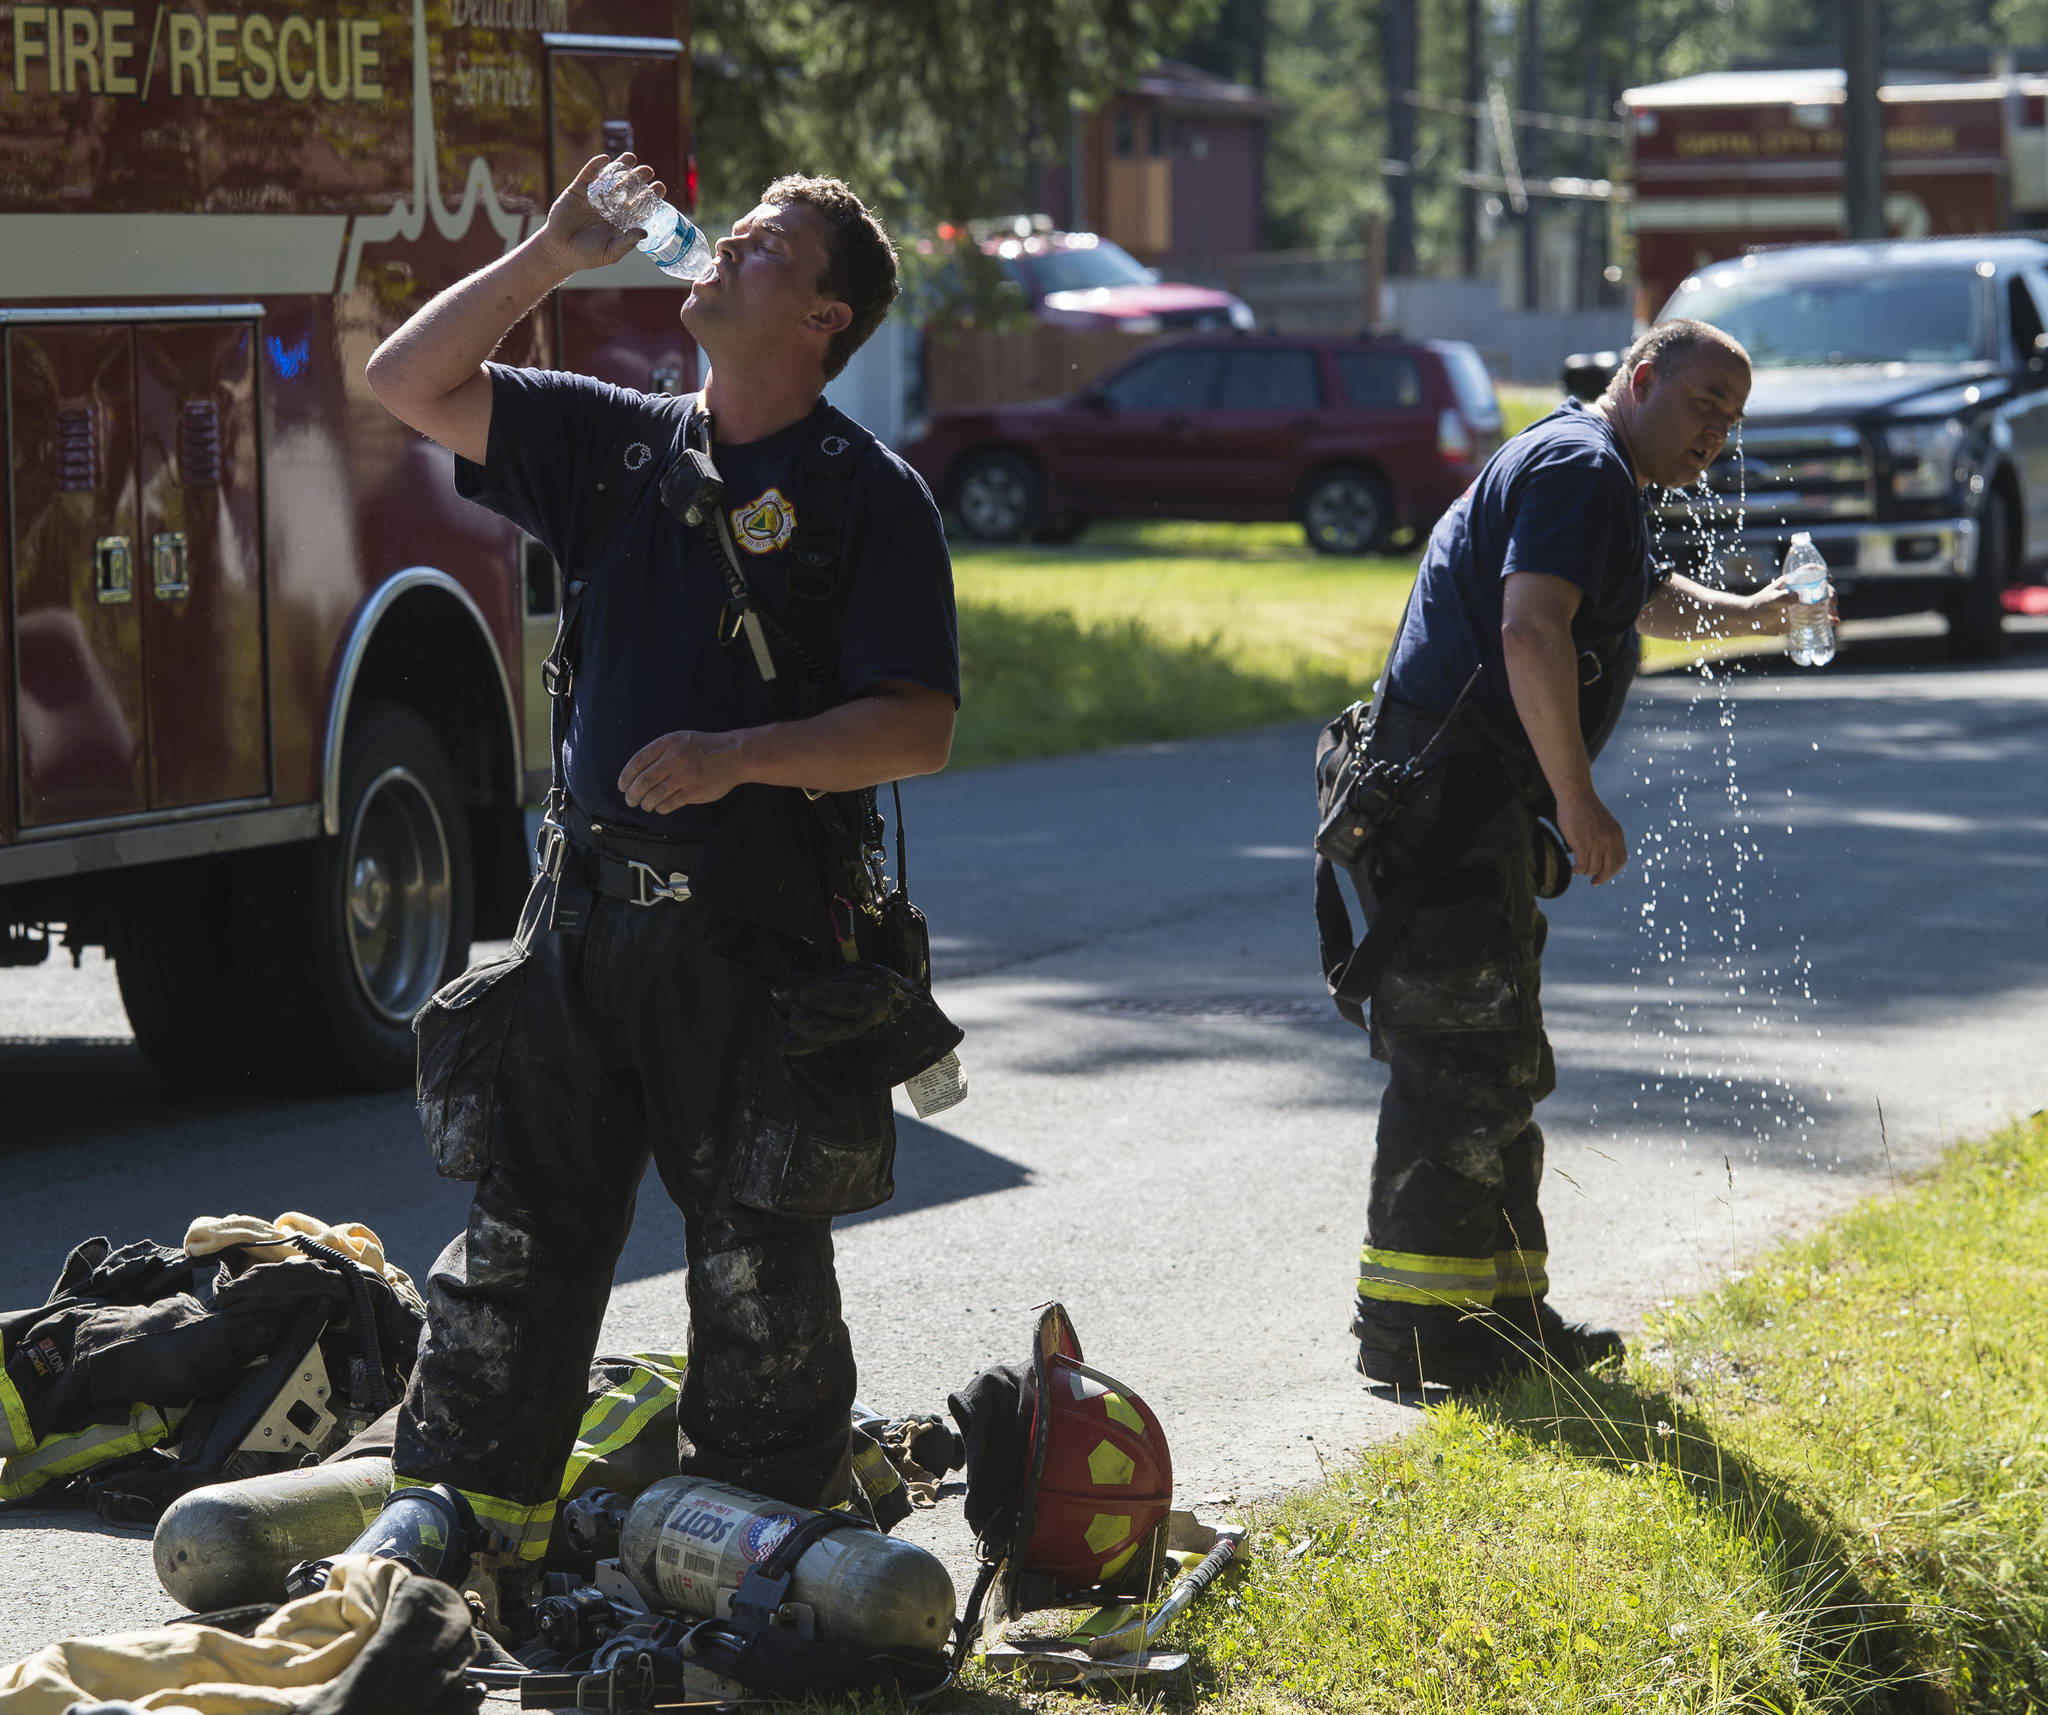 Capital City Fire/Rescue firemen attempt to cool off after fighting a house fire at 8460 Kimberly Street on Friday, July 20, 2018. (Michael Penn | Juneau Empire)